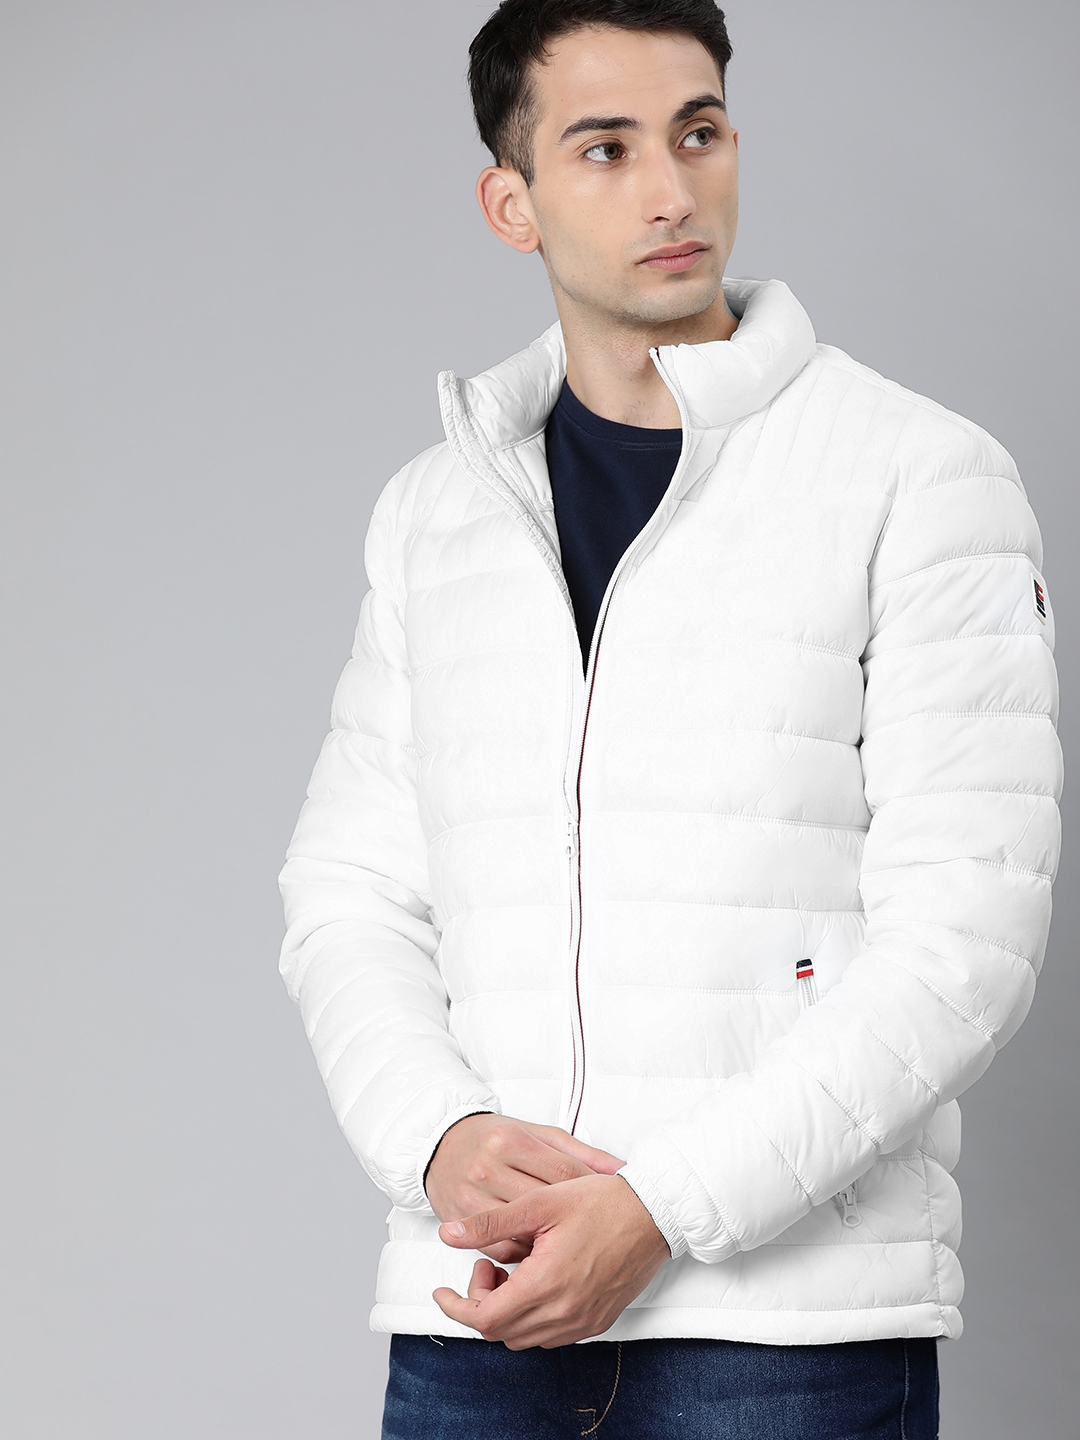 Buy U.S. Polo Assn. Men White Lightweight Solid Padded Jacket - Jackets for Men 12916446 | Myntra